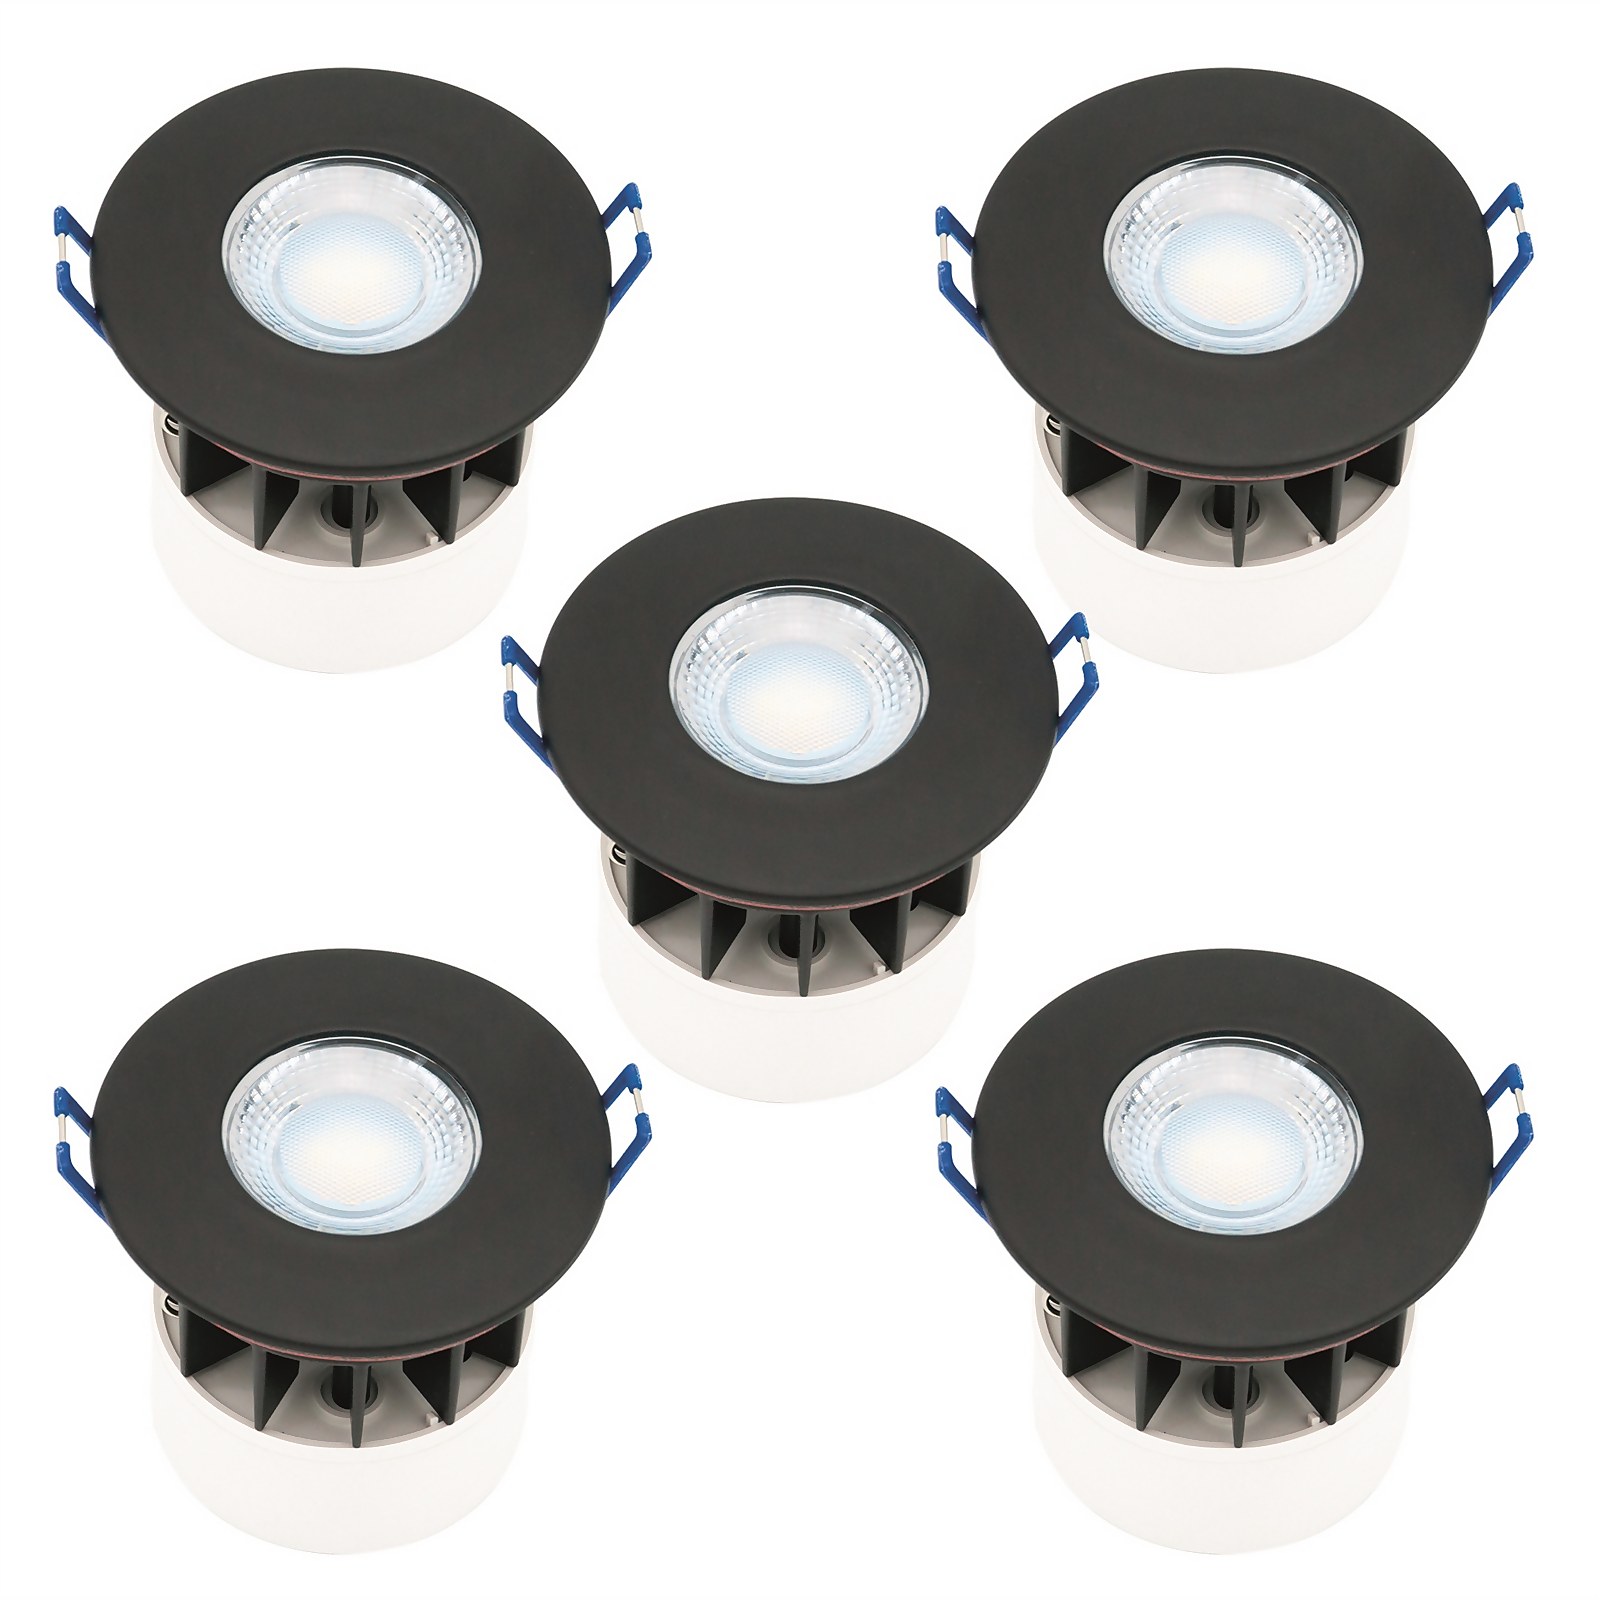 Photo of Fixed Fire Rated Ip65 Led 5 Pack - Black